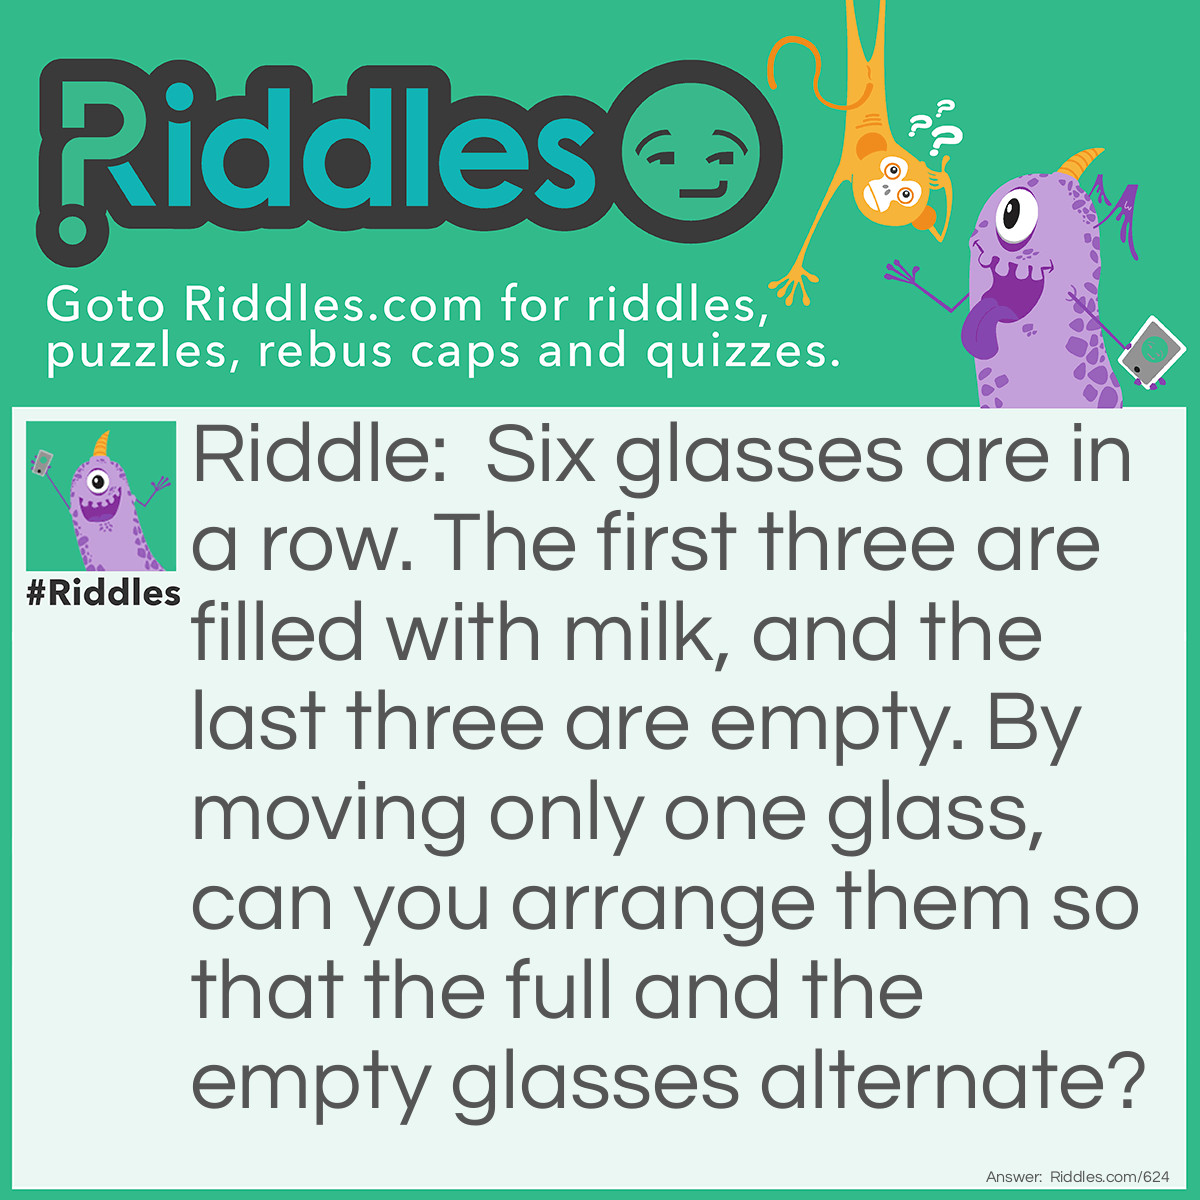 Riddle: Six glasses are in a row. The first three are filled with milk, and the last three are empty. By moving only one glass, can you arrange them so that the full and the empty glasses alternate? Answer: Pick up the second glass and pour the milk into the fifth glass and then put it back in the second position.